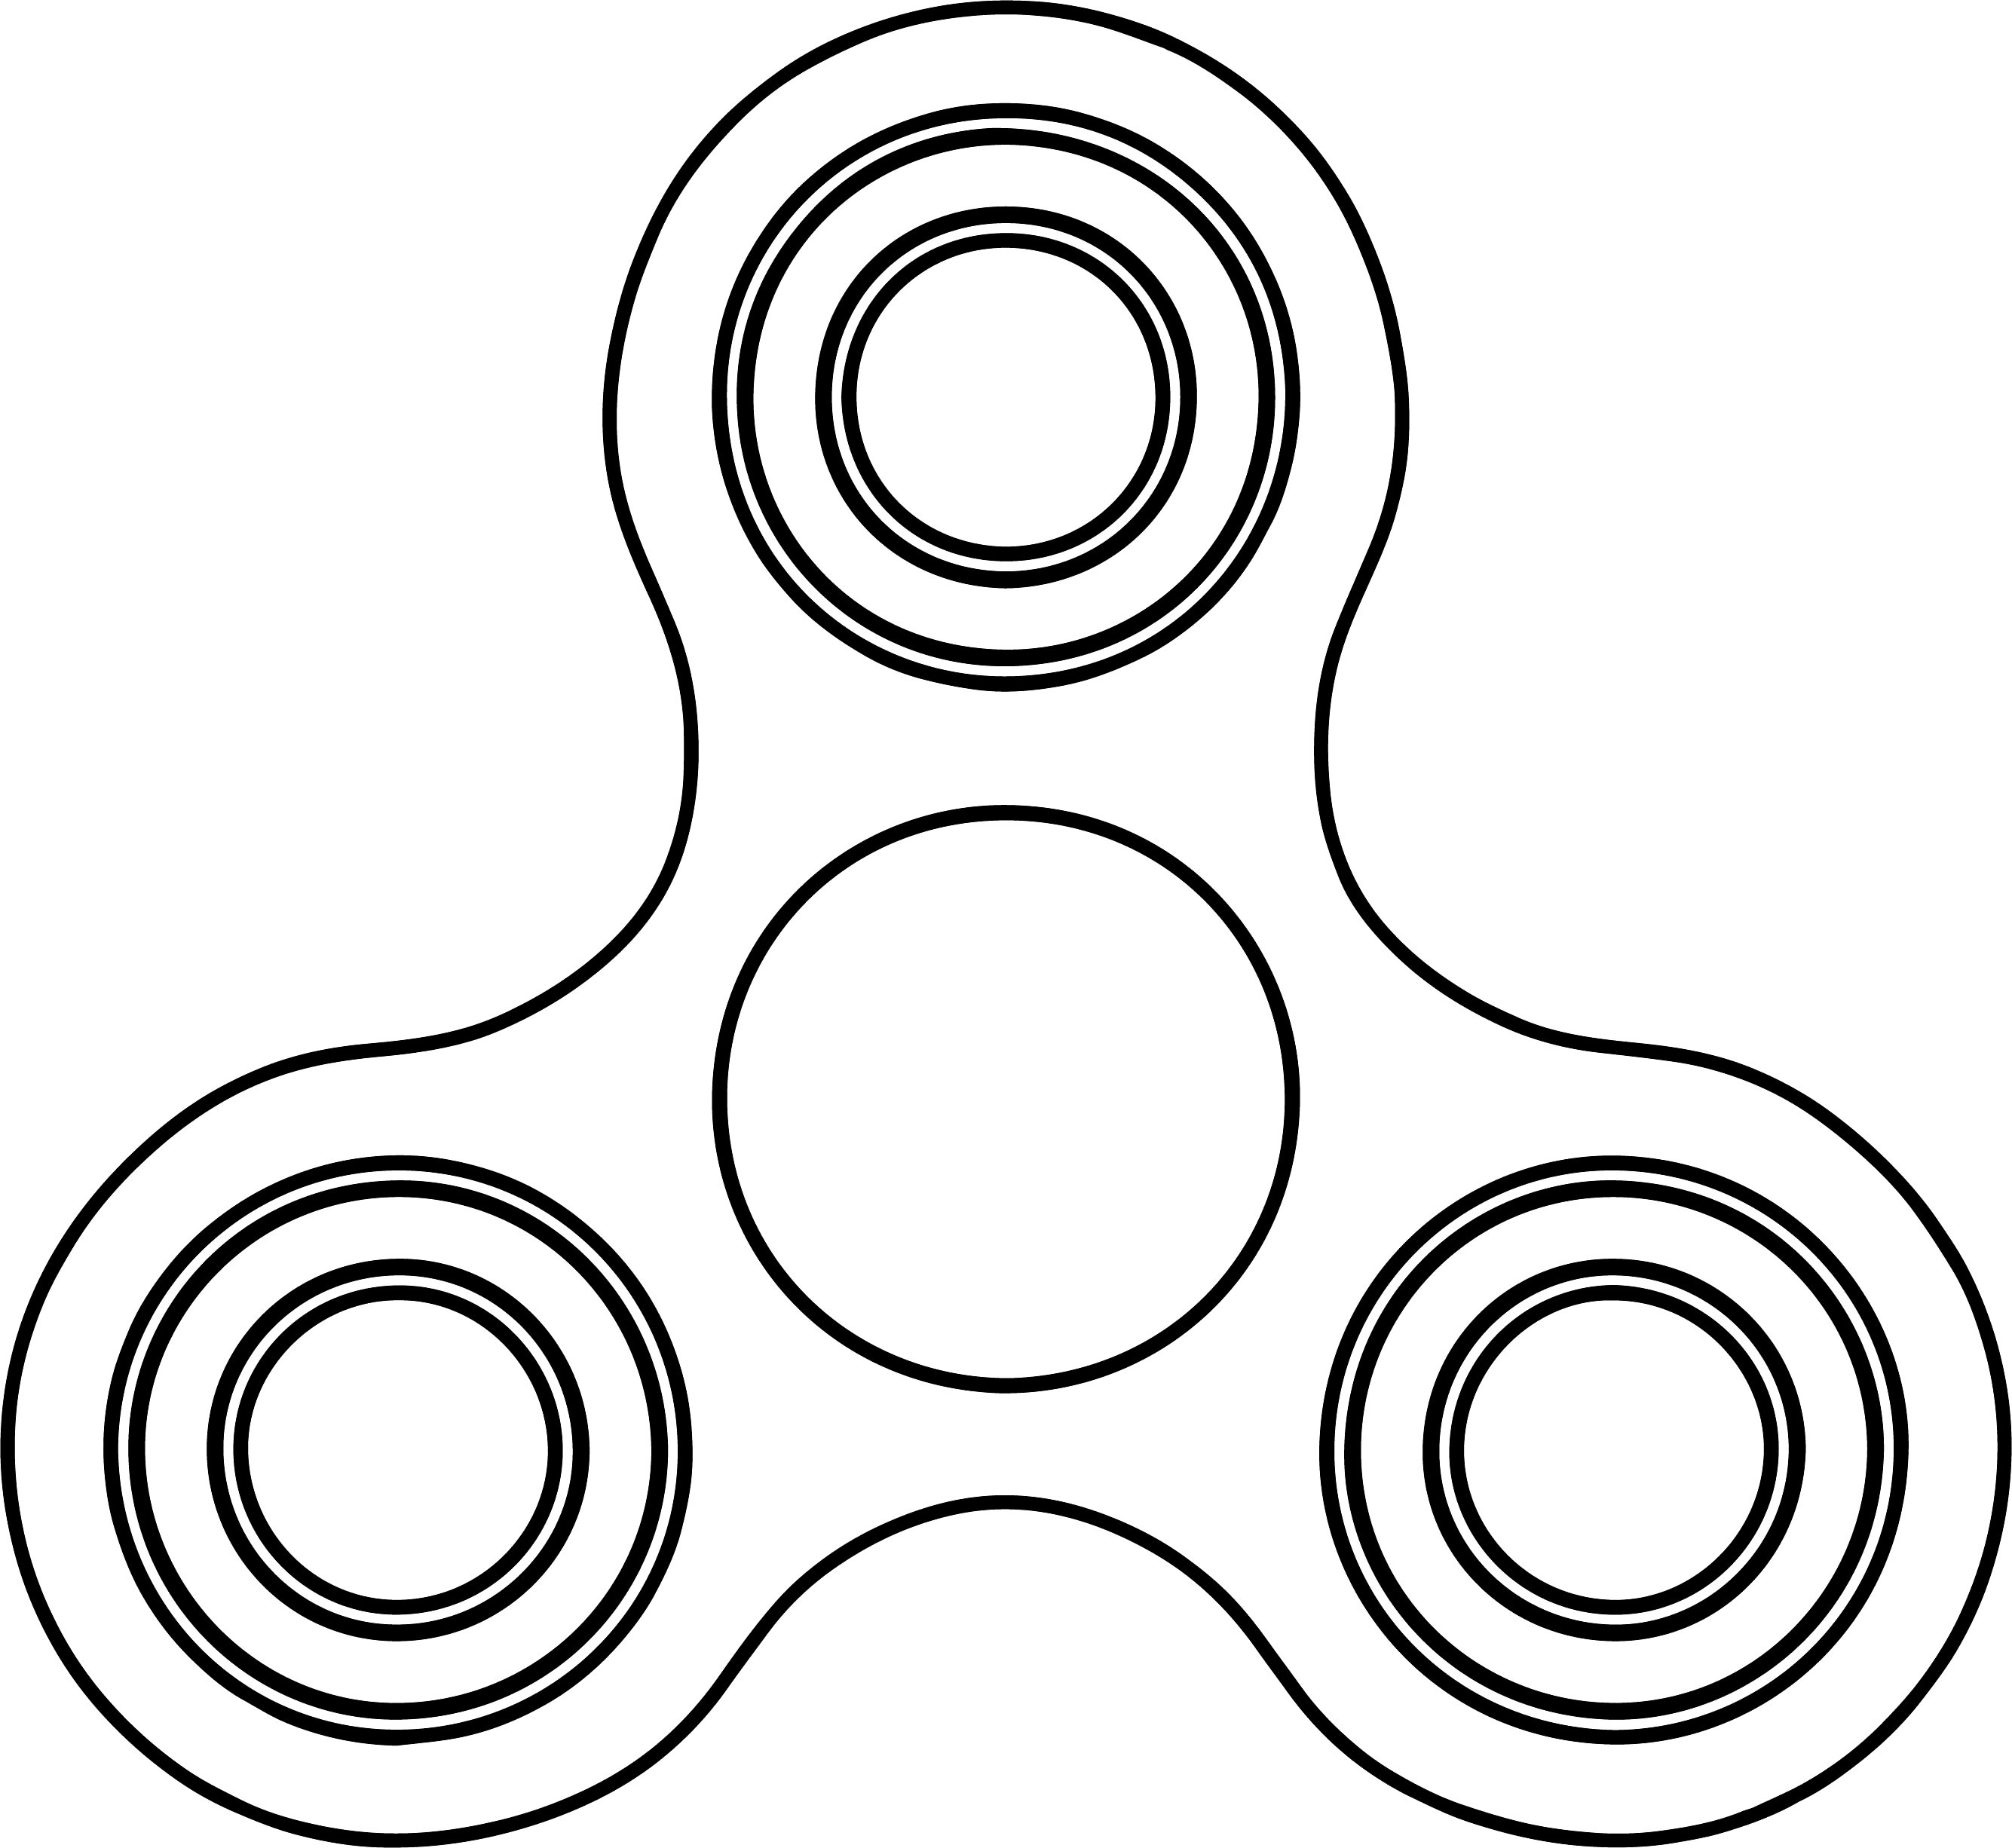 Coloring Pages Of Fidget Spinners Images Of Flower Shaped Fidget Spinner Coloring Pages